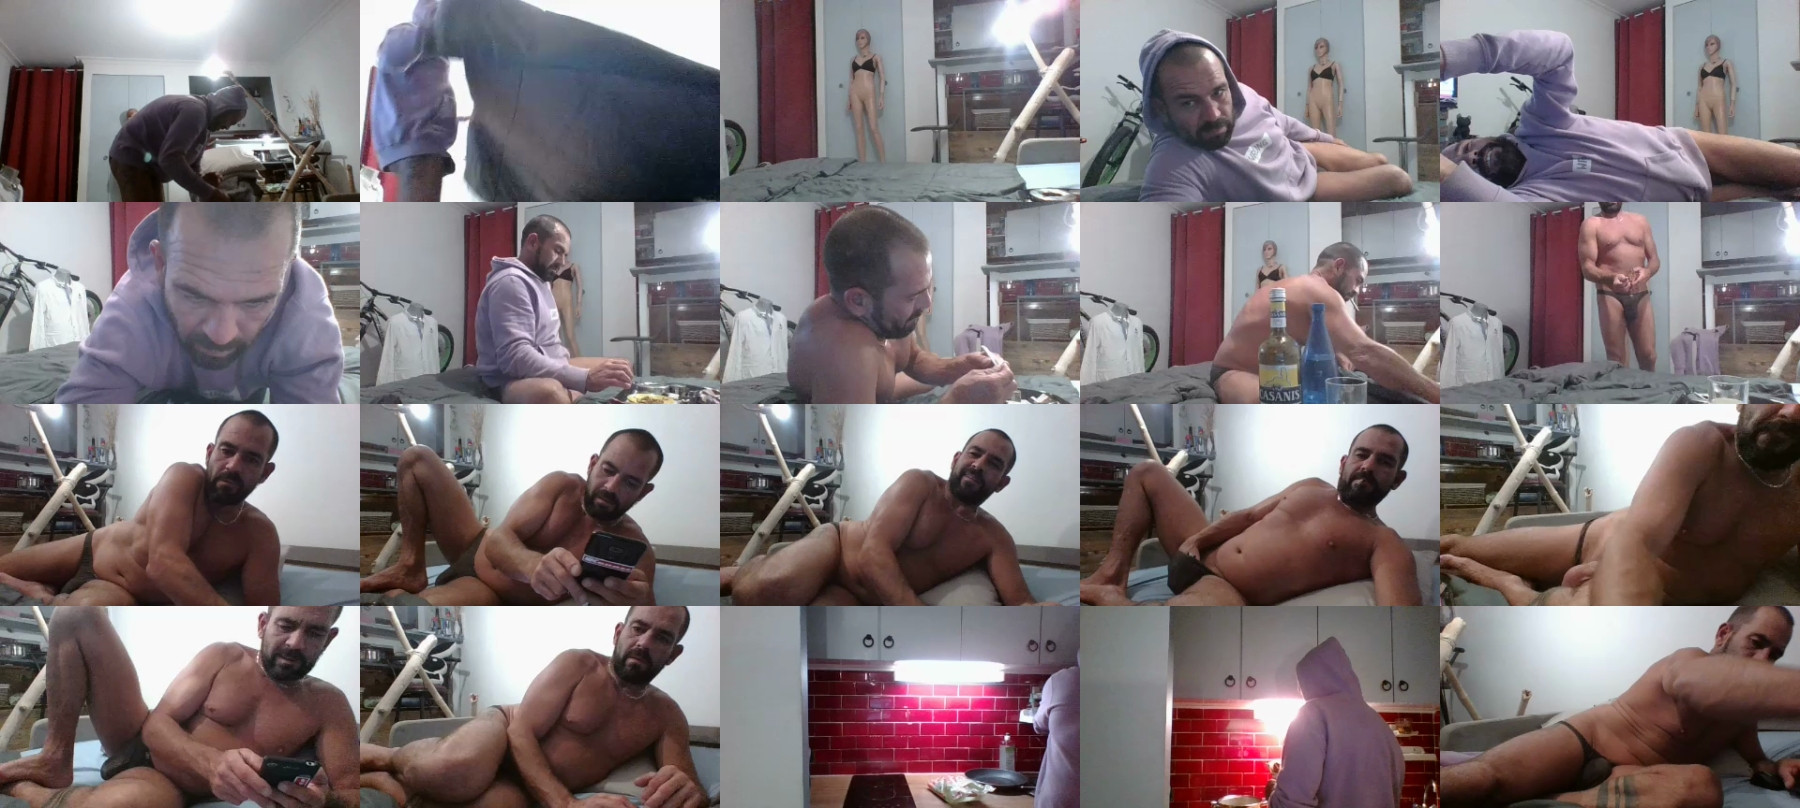 DJUX06  01-05-2021 Recorded Video Show